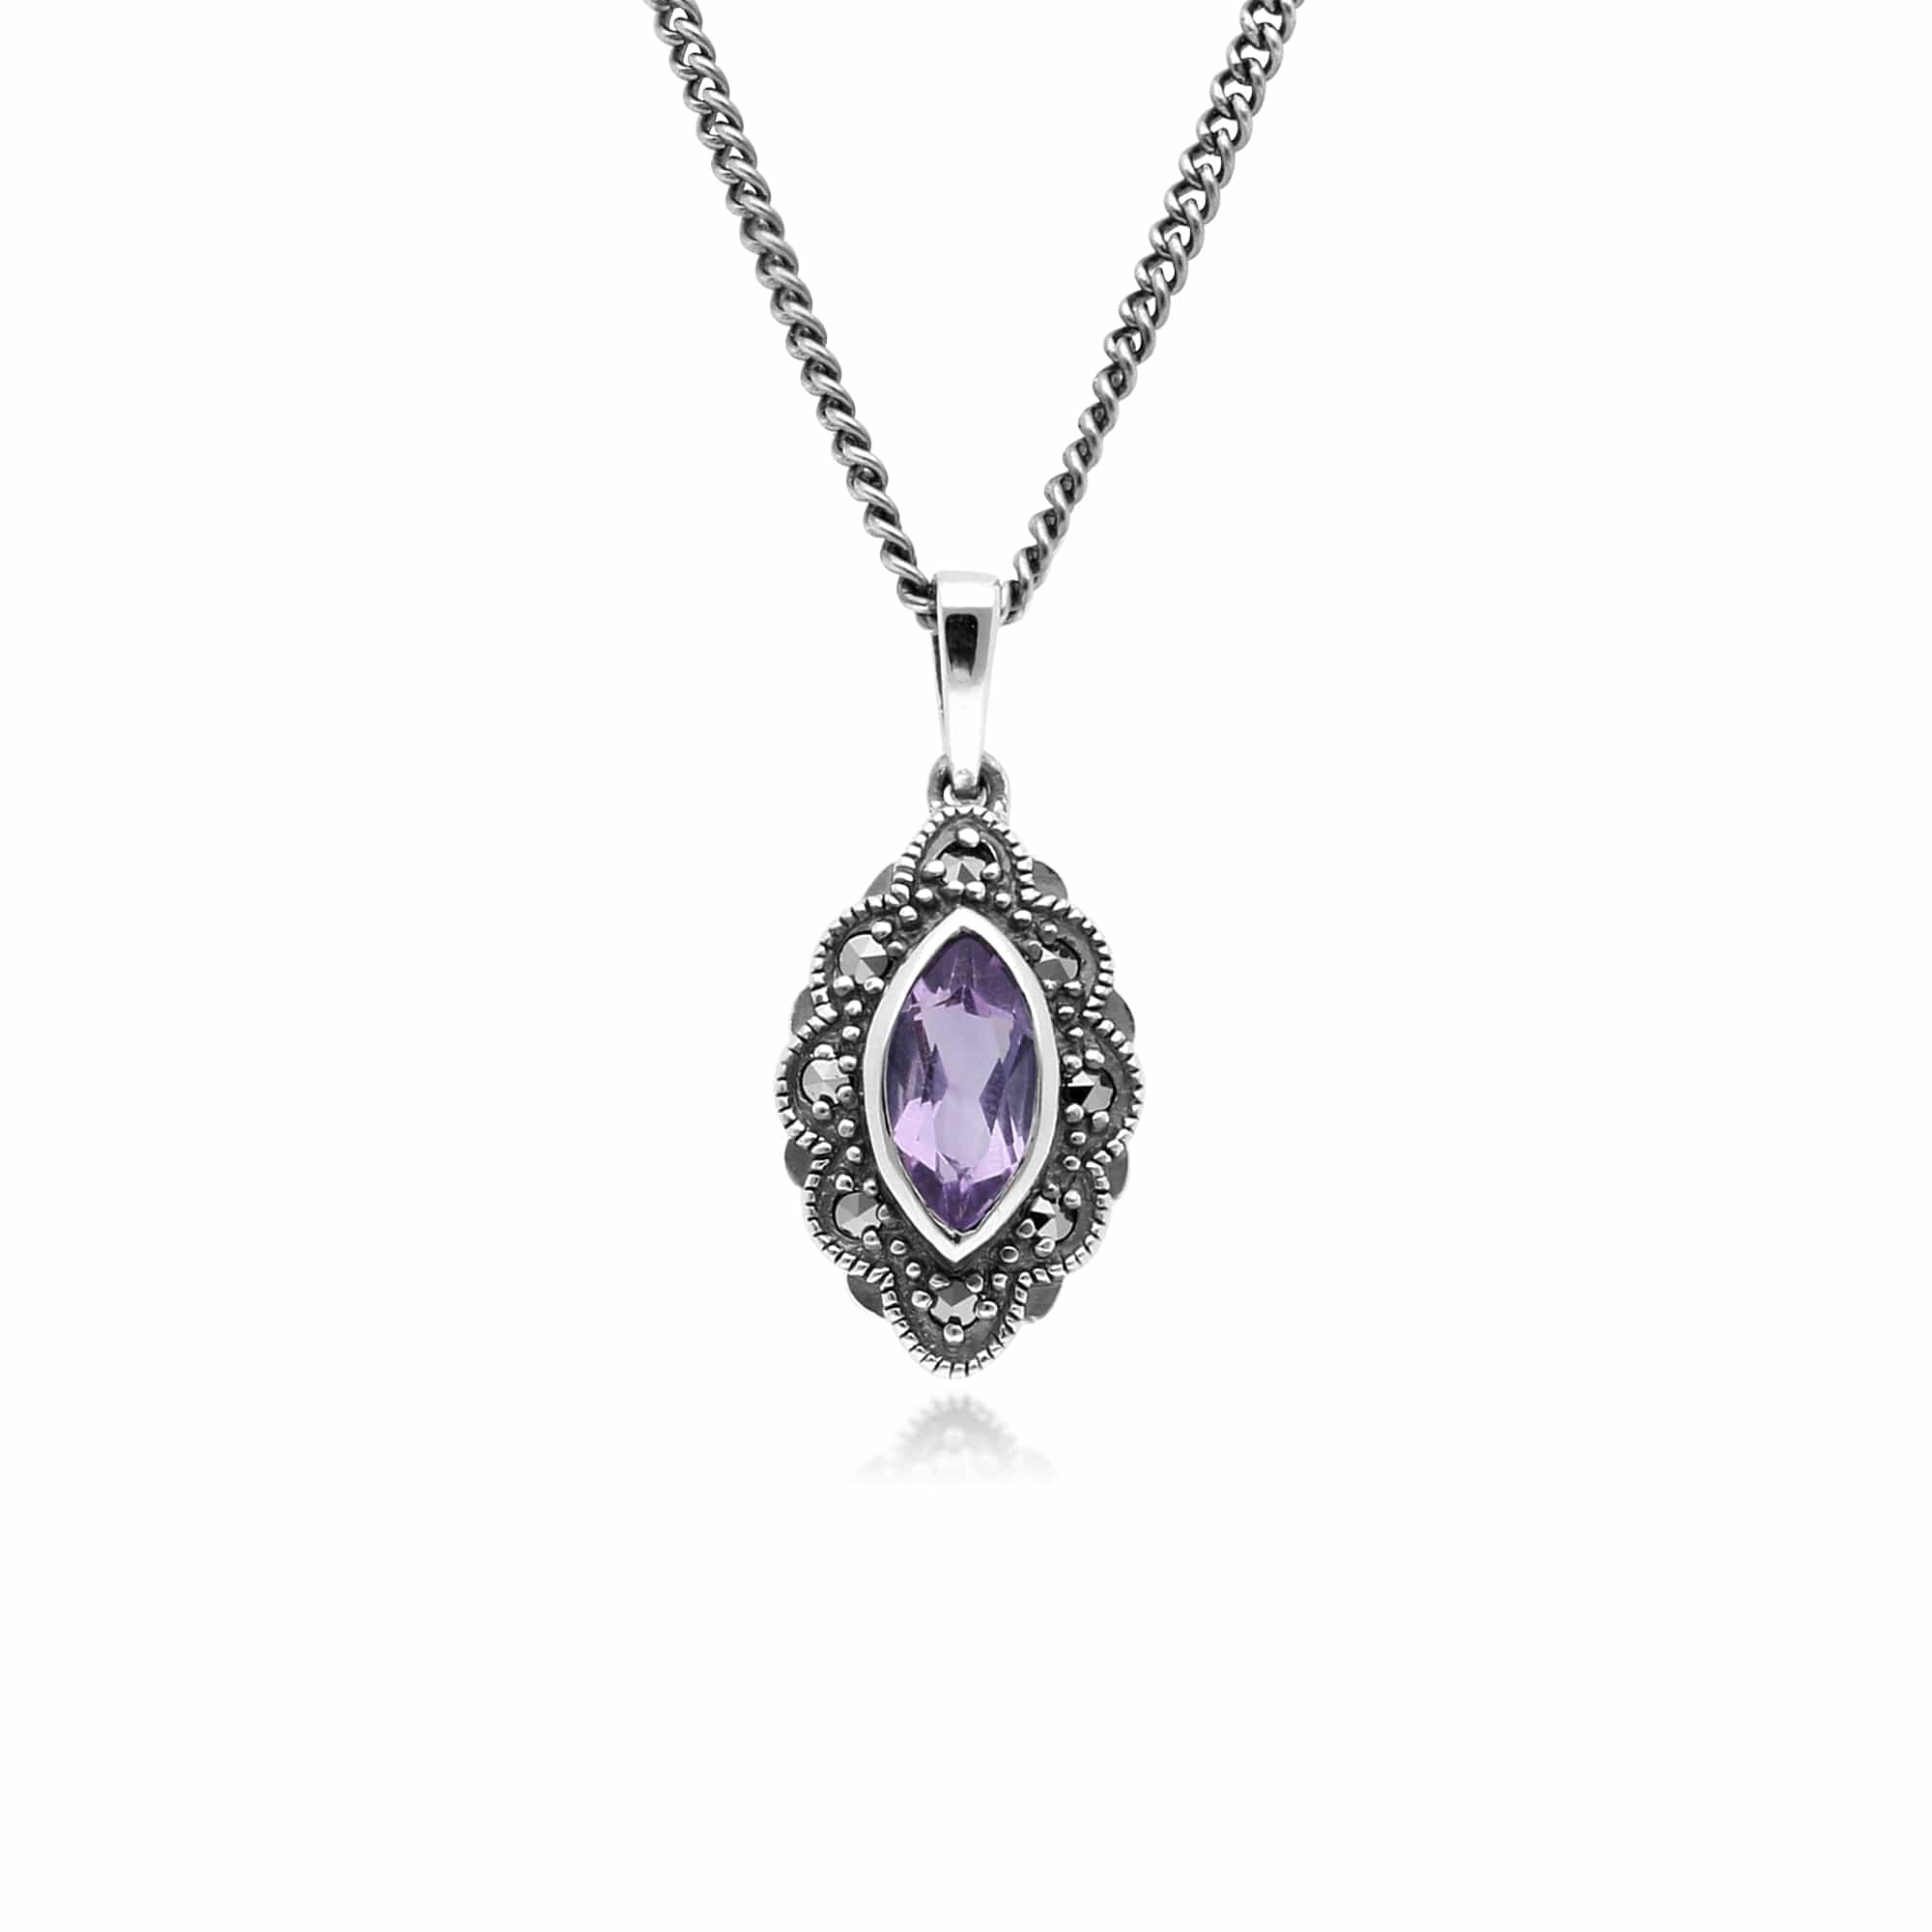 214N696102925 Art Deco Style Marquise Amethyst & Marcasite Pendant in 925 Sterling Silver 1